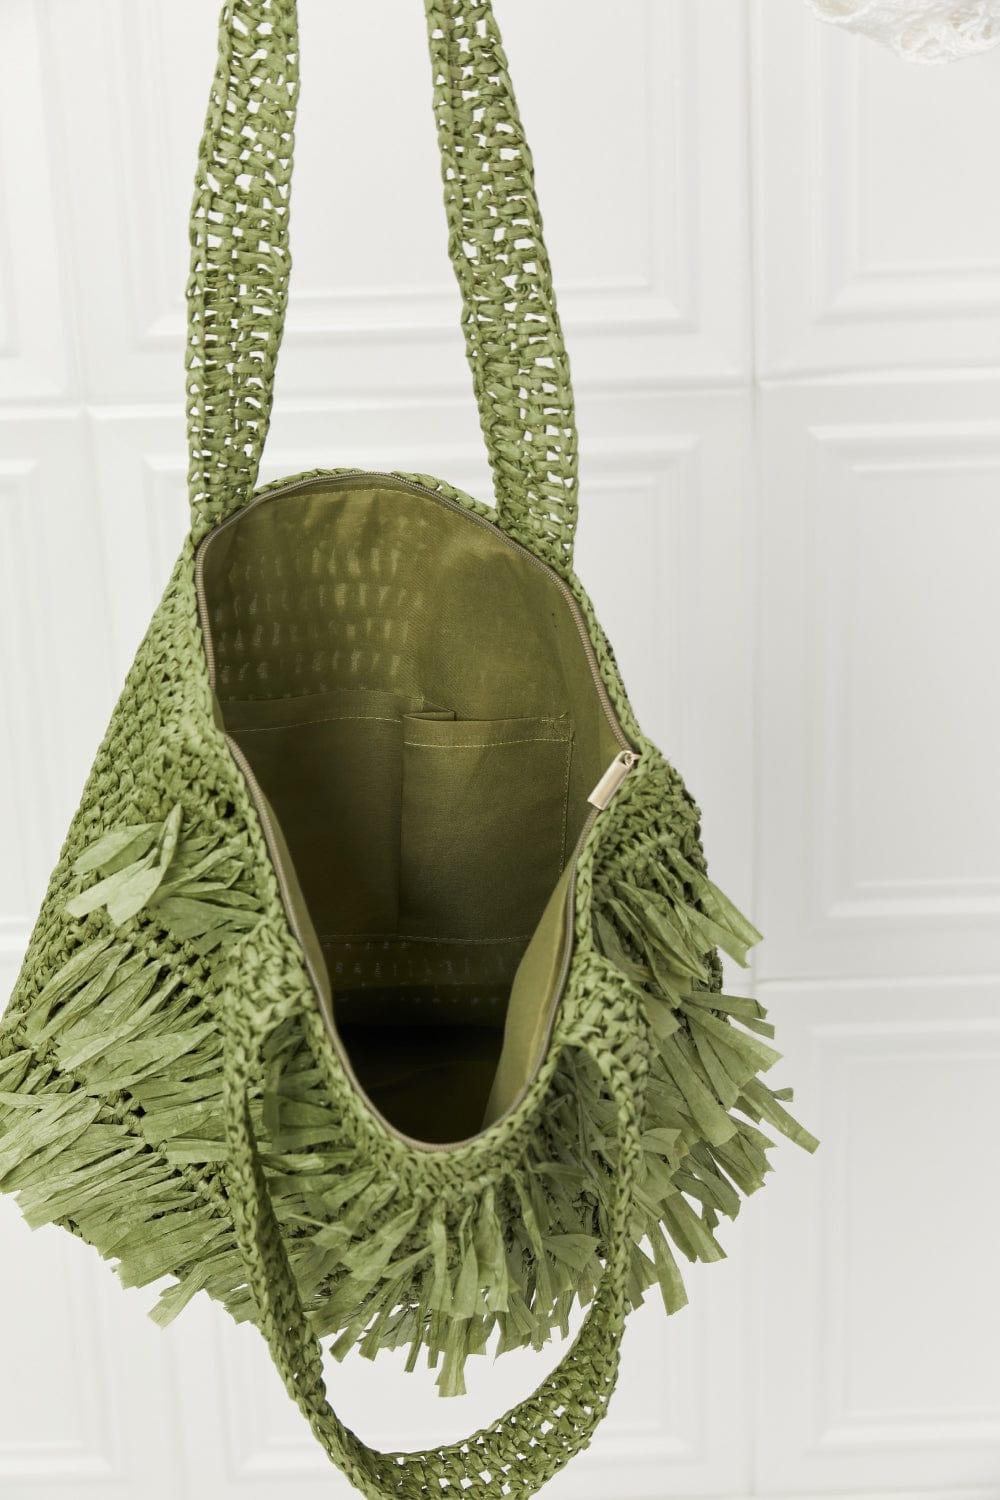 Fame Accessories Olive / One Size Fame The Last Straw Fringe Straw Tote Bag